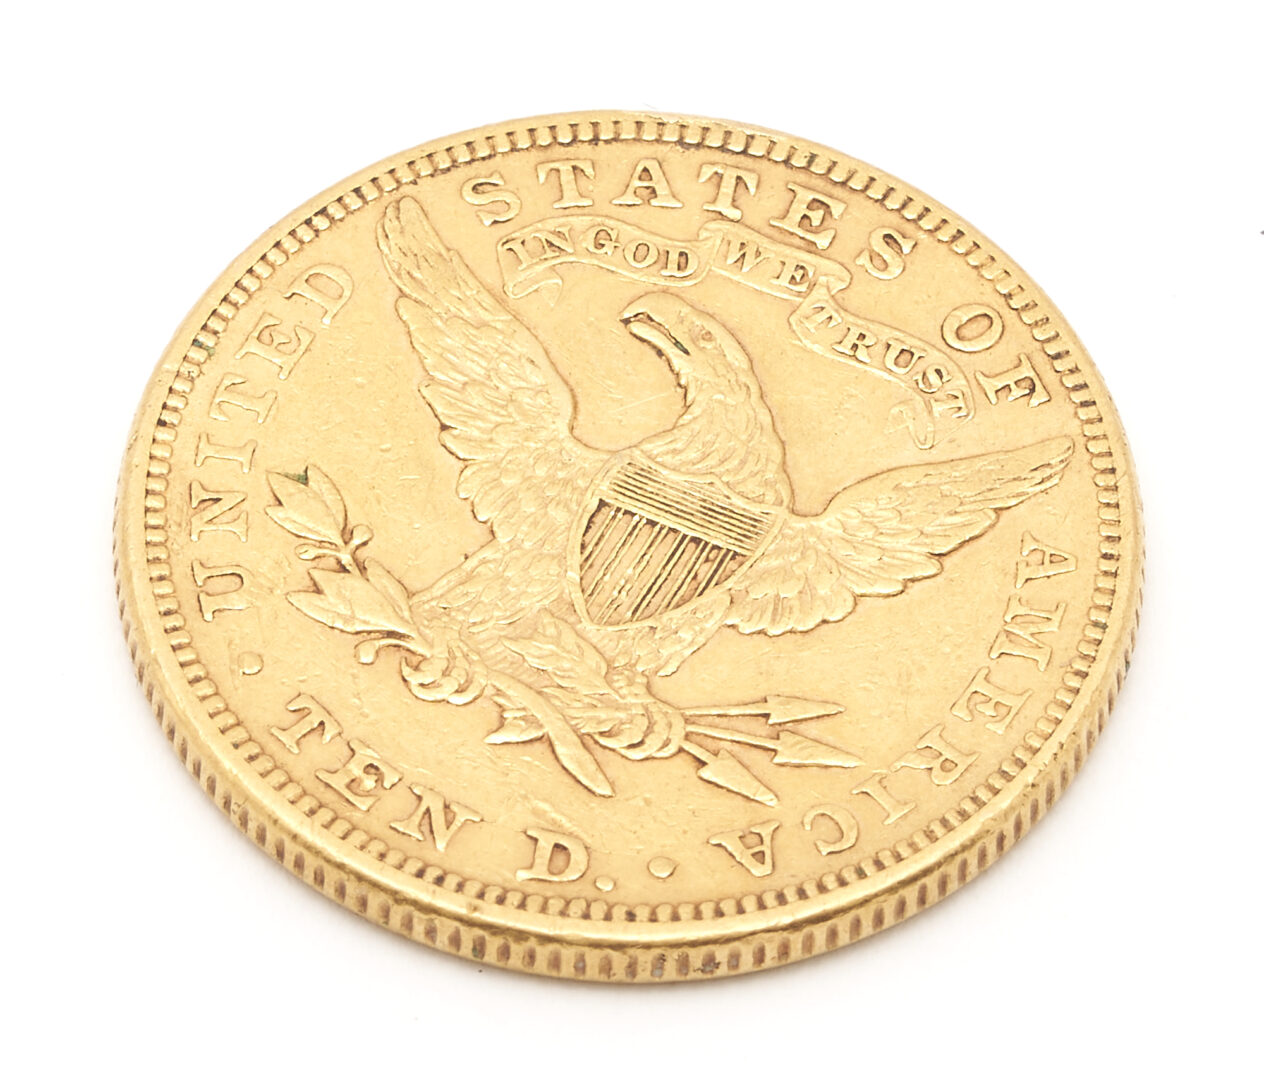 Lot 605: 1882 US $10 Liberty Head Gold Coin